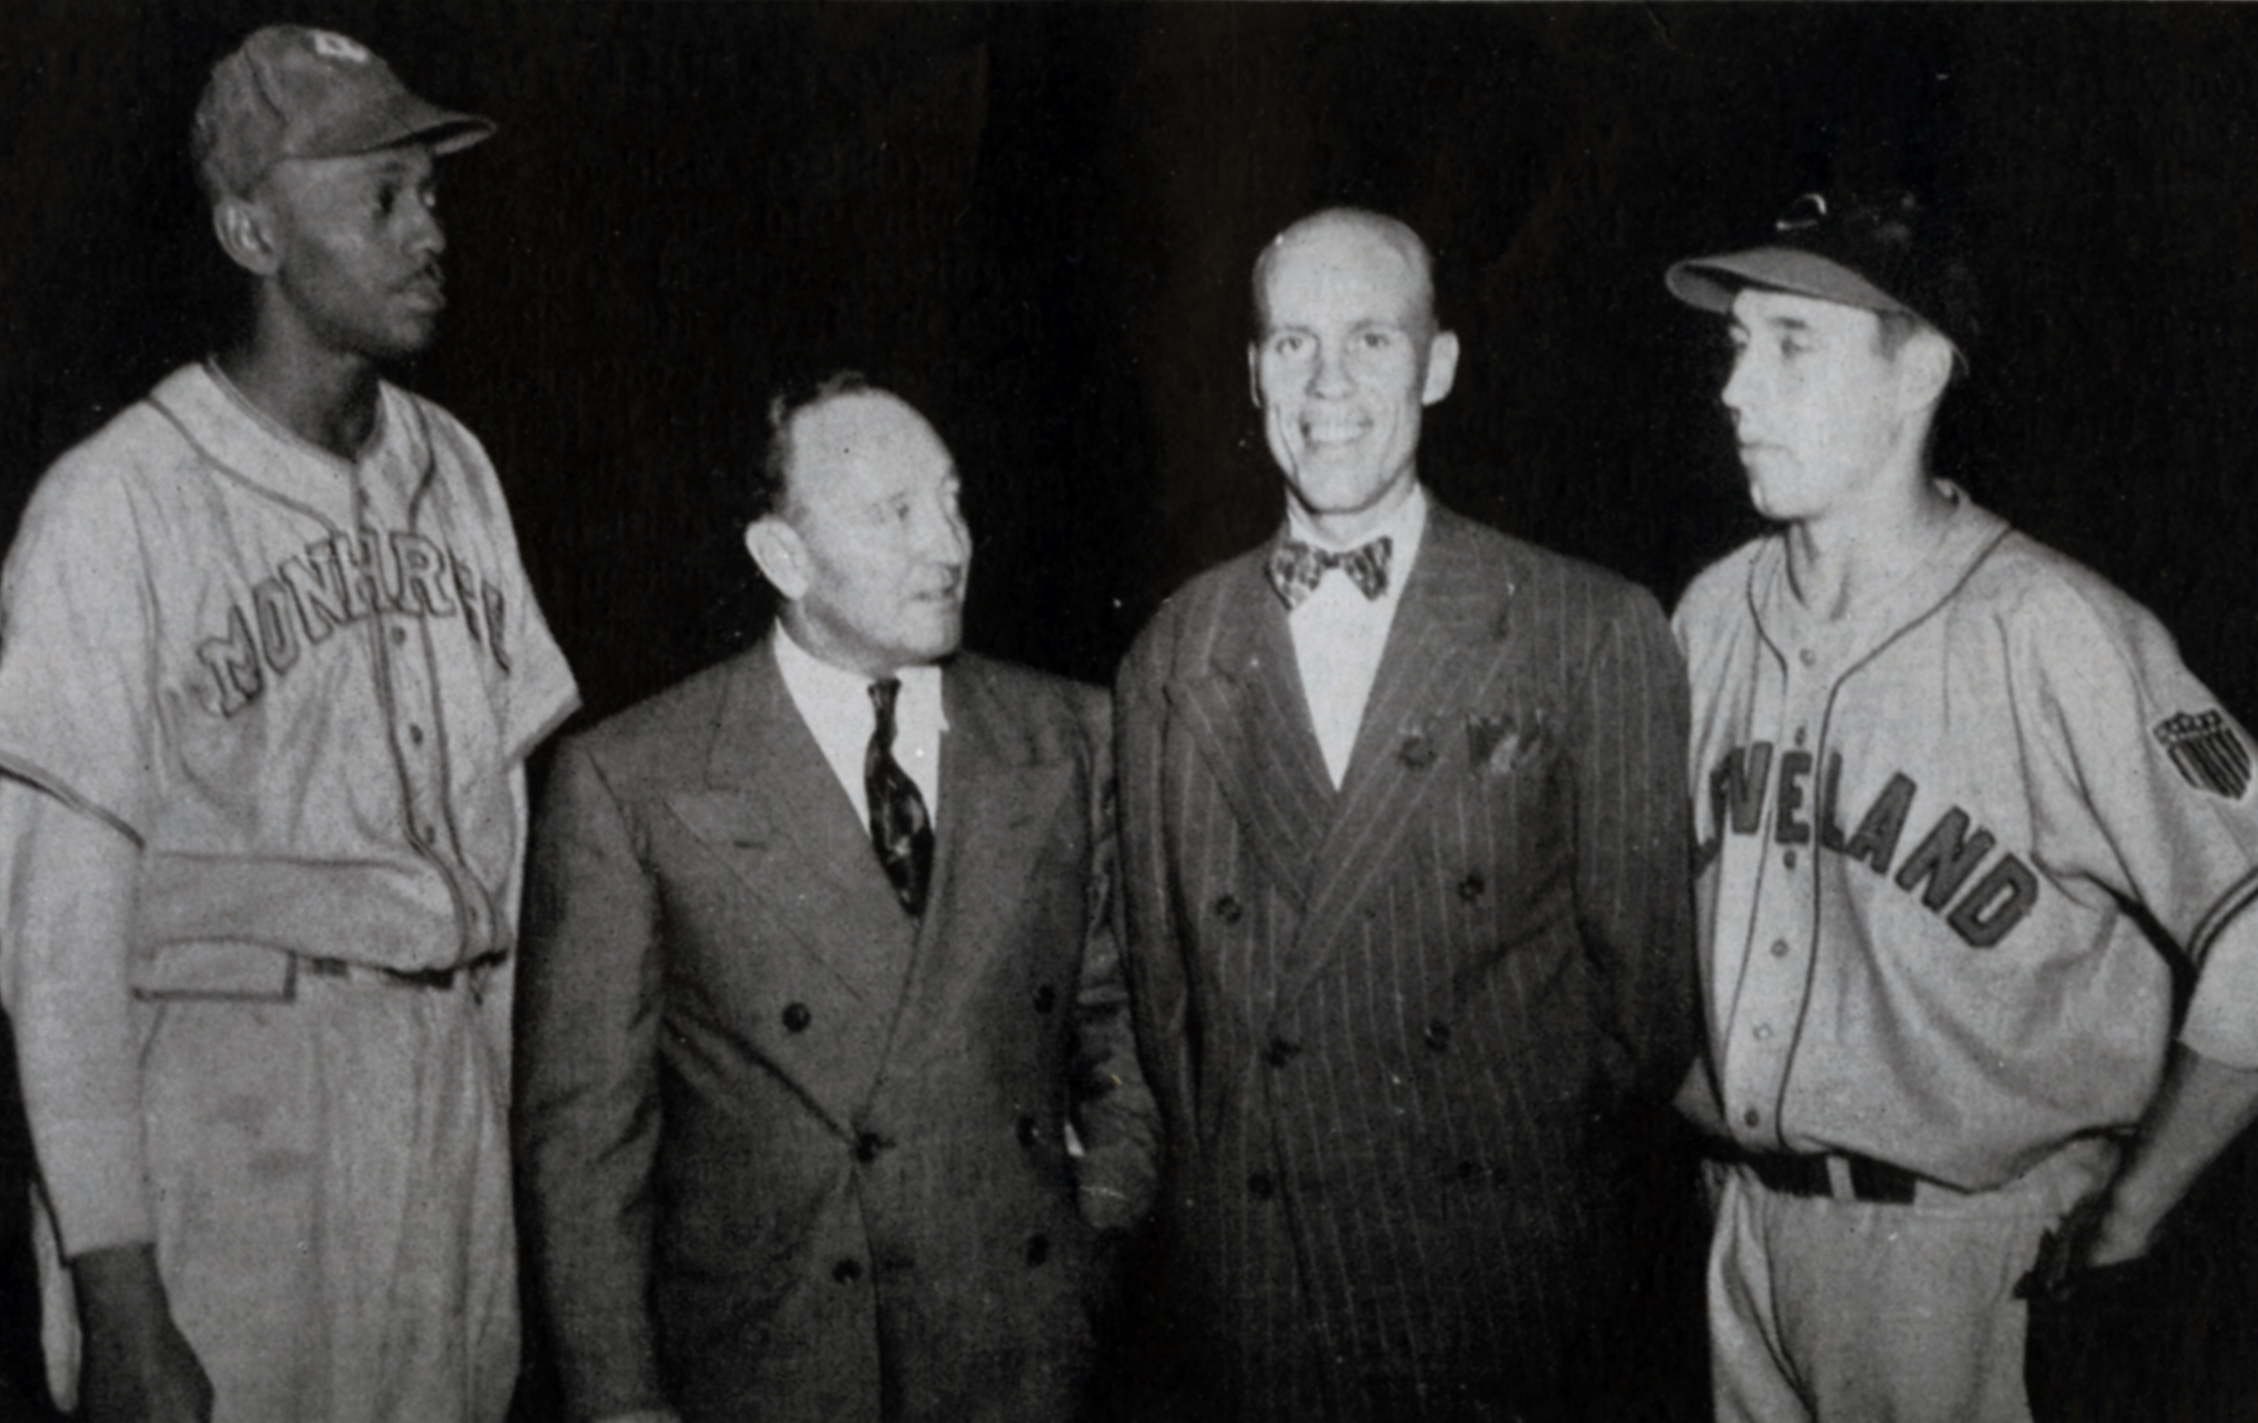 From left, Negro Leagues star Satchel Paige, broadcaster and future manager Fred Haney, outfielder Pete Gray, and Cleveland Indians ace Bob Feller pose for a photo in Los Angeles, where more than 20,000 fans watched Feller’s all-star team beat Paige’s team in a postseason exhibition in 1946. (SABR-RUCKER ARCHIVE)